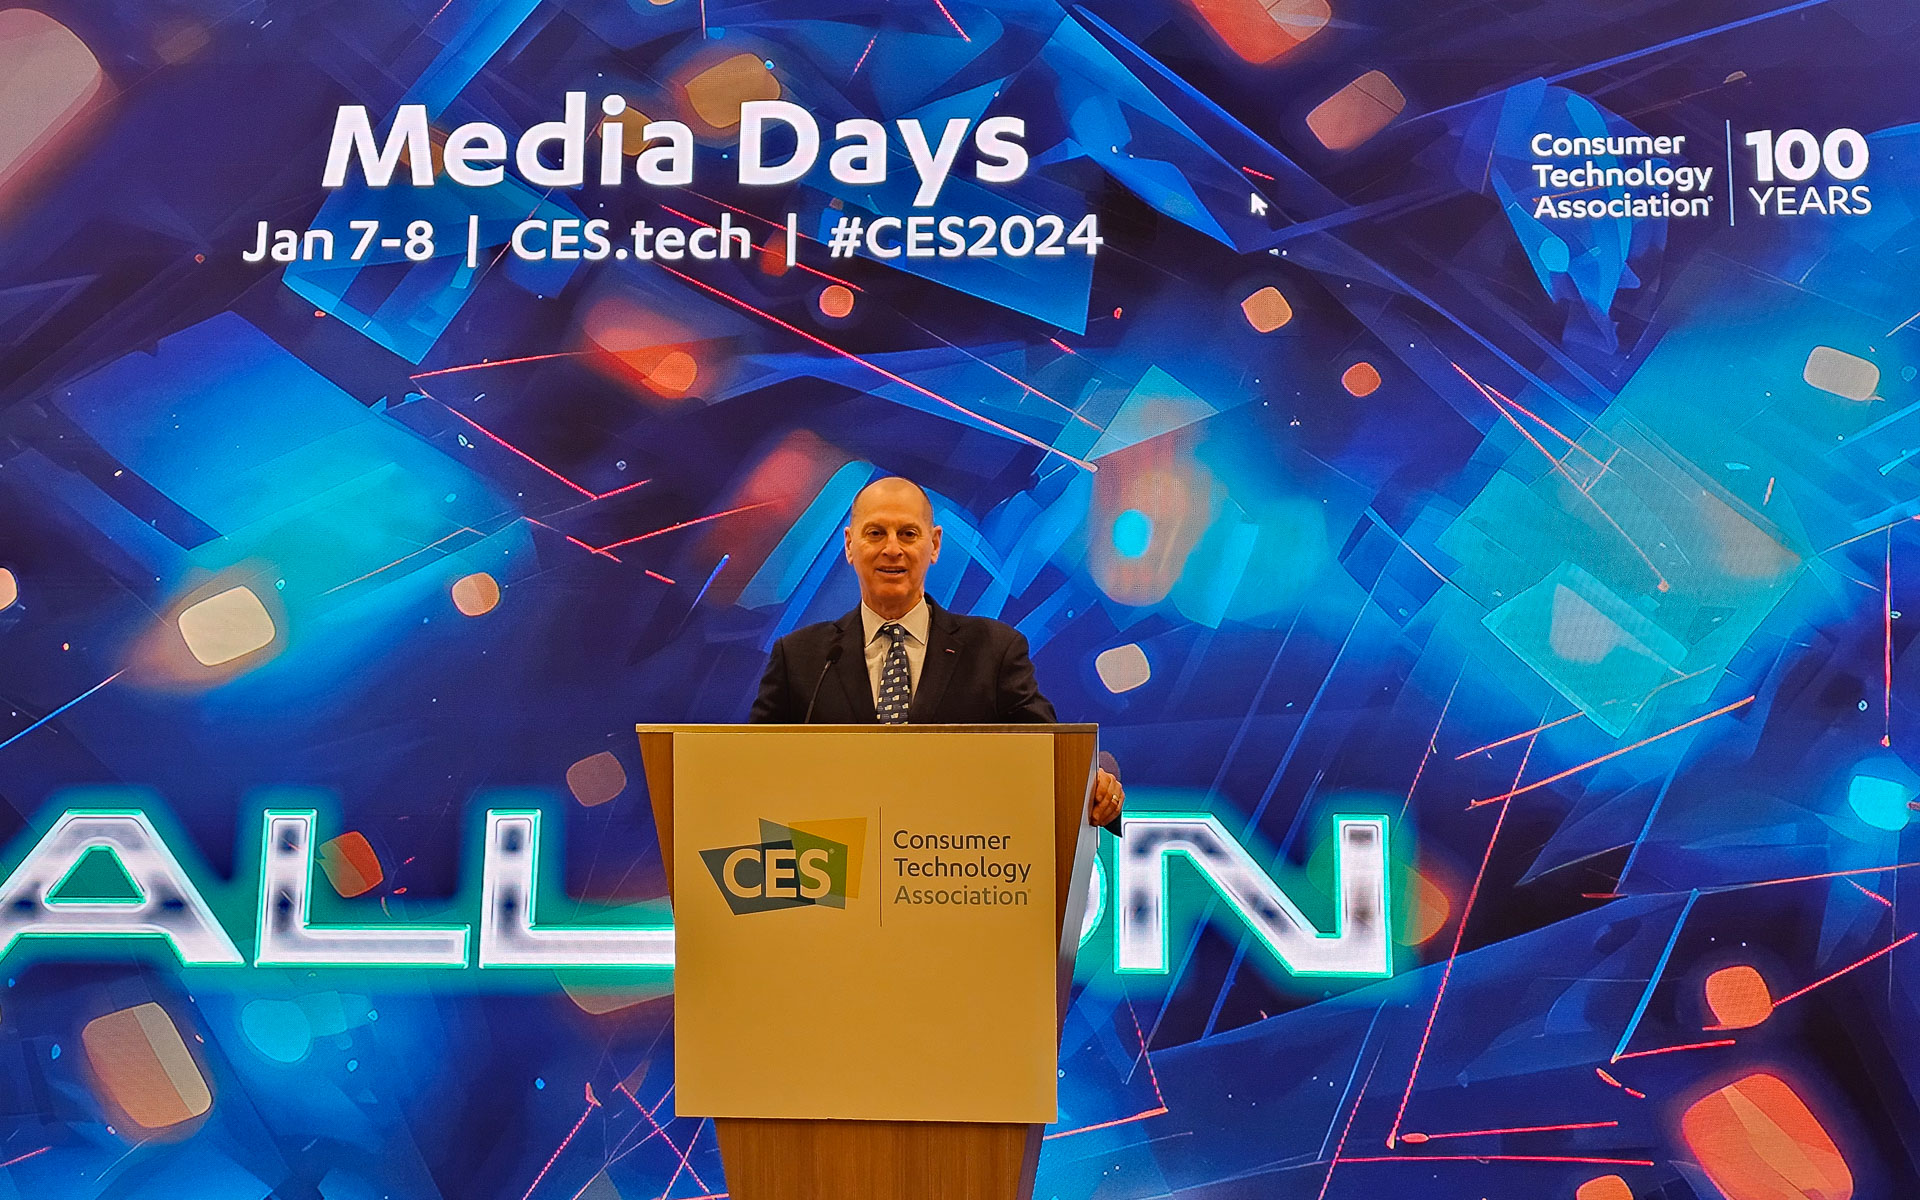 CES 2024 CTA Celebrates 100 Years, Announces "ALL ON" Theme, and